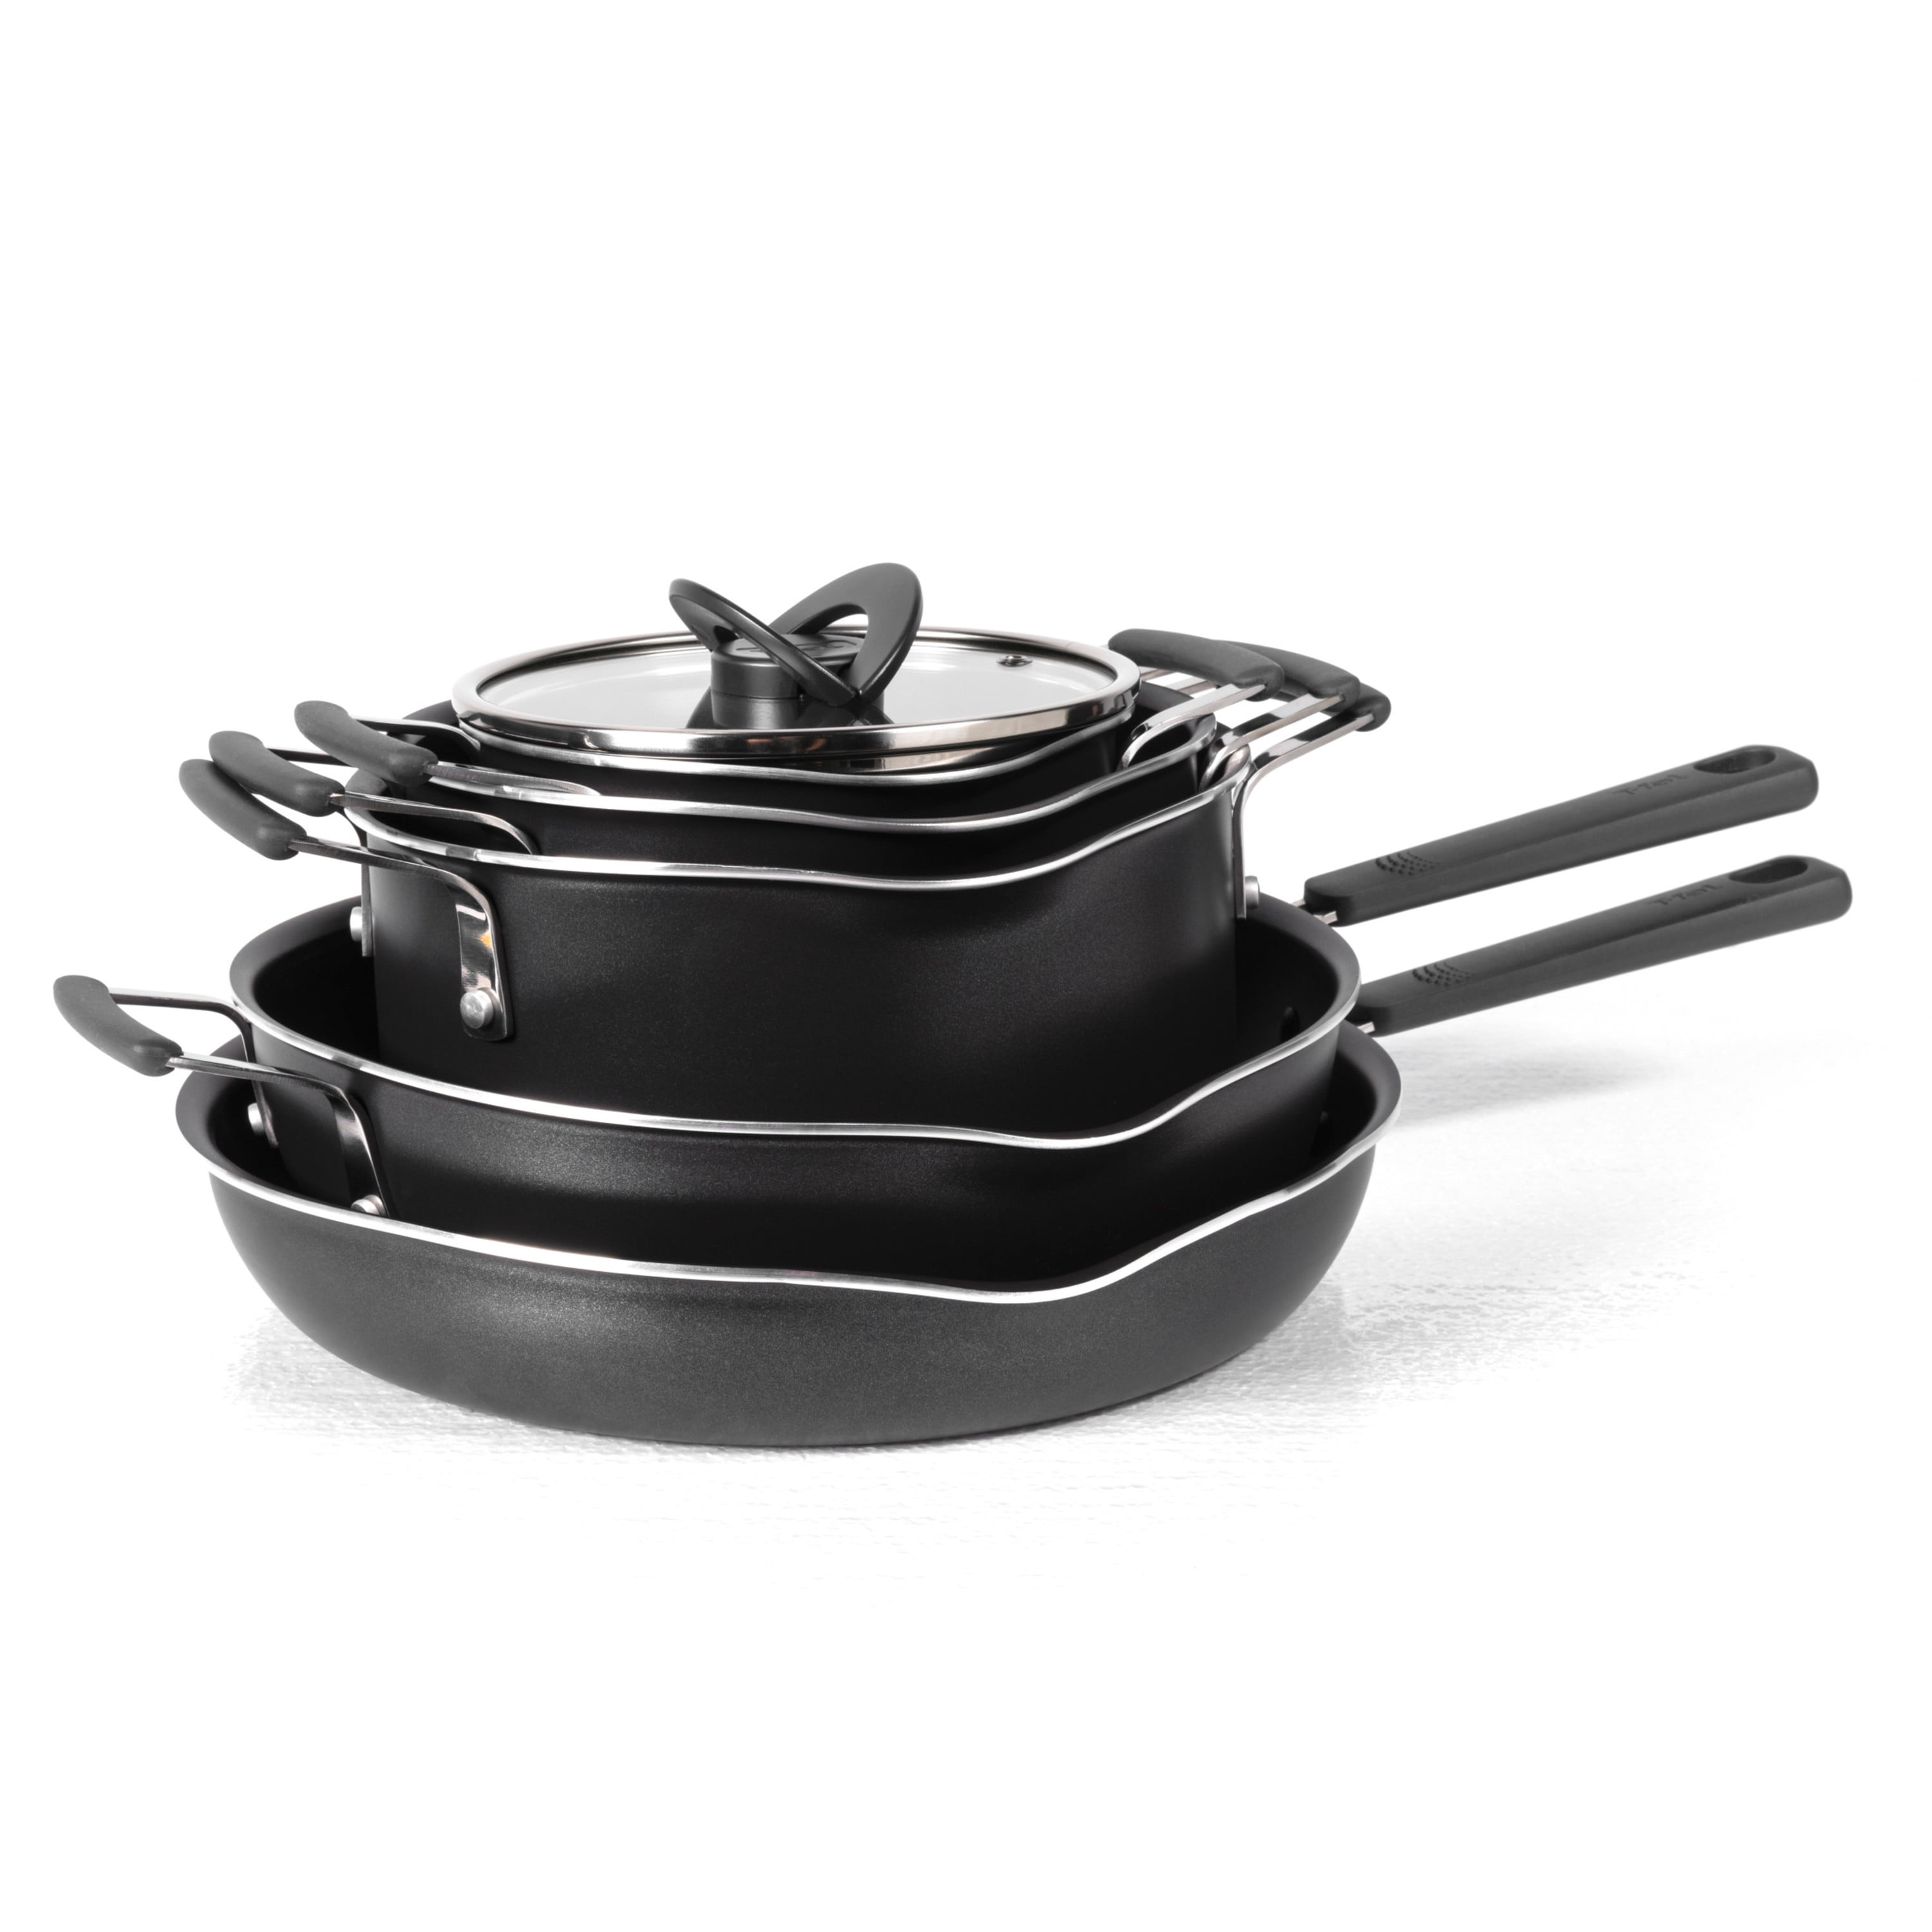 T-fal All-in-One Dishwasher Safe Cookware Set, 10-Piece, Black